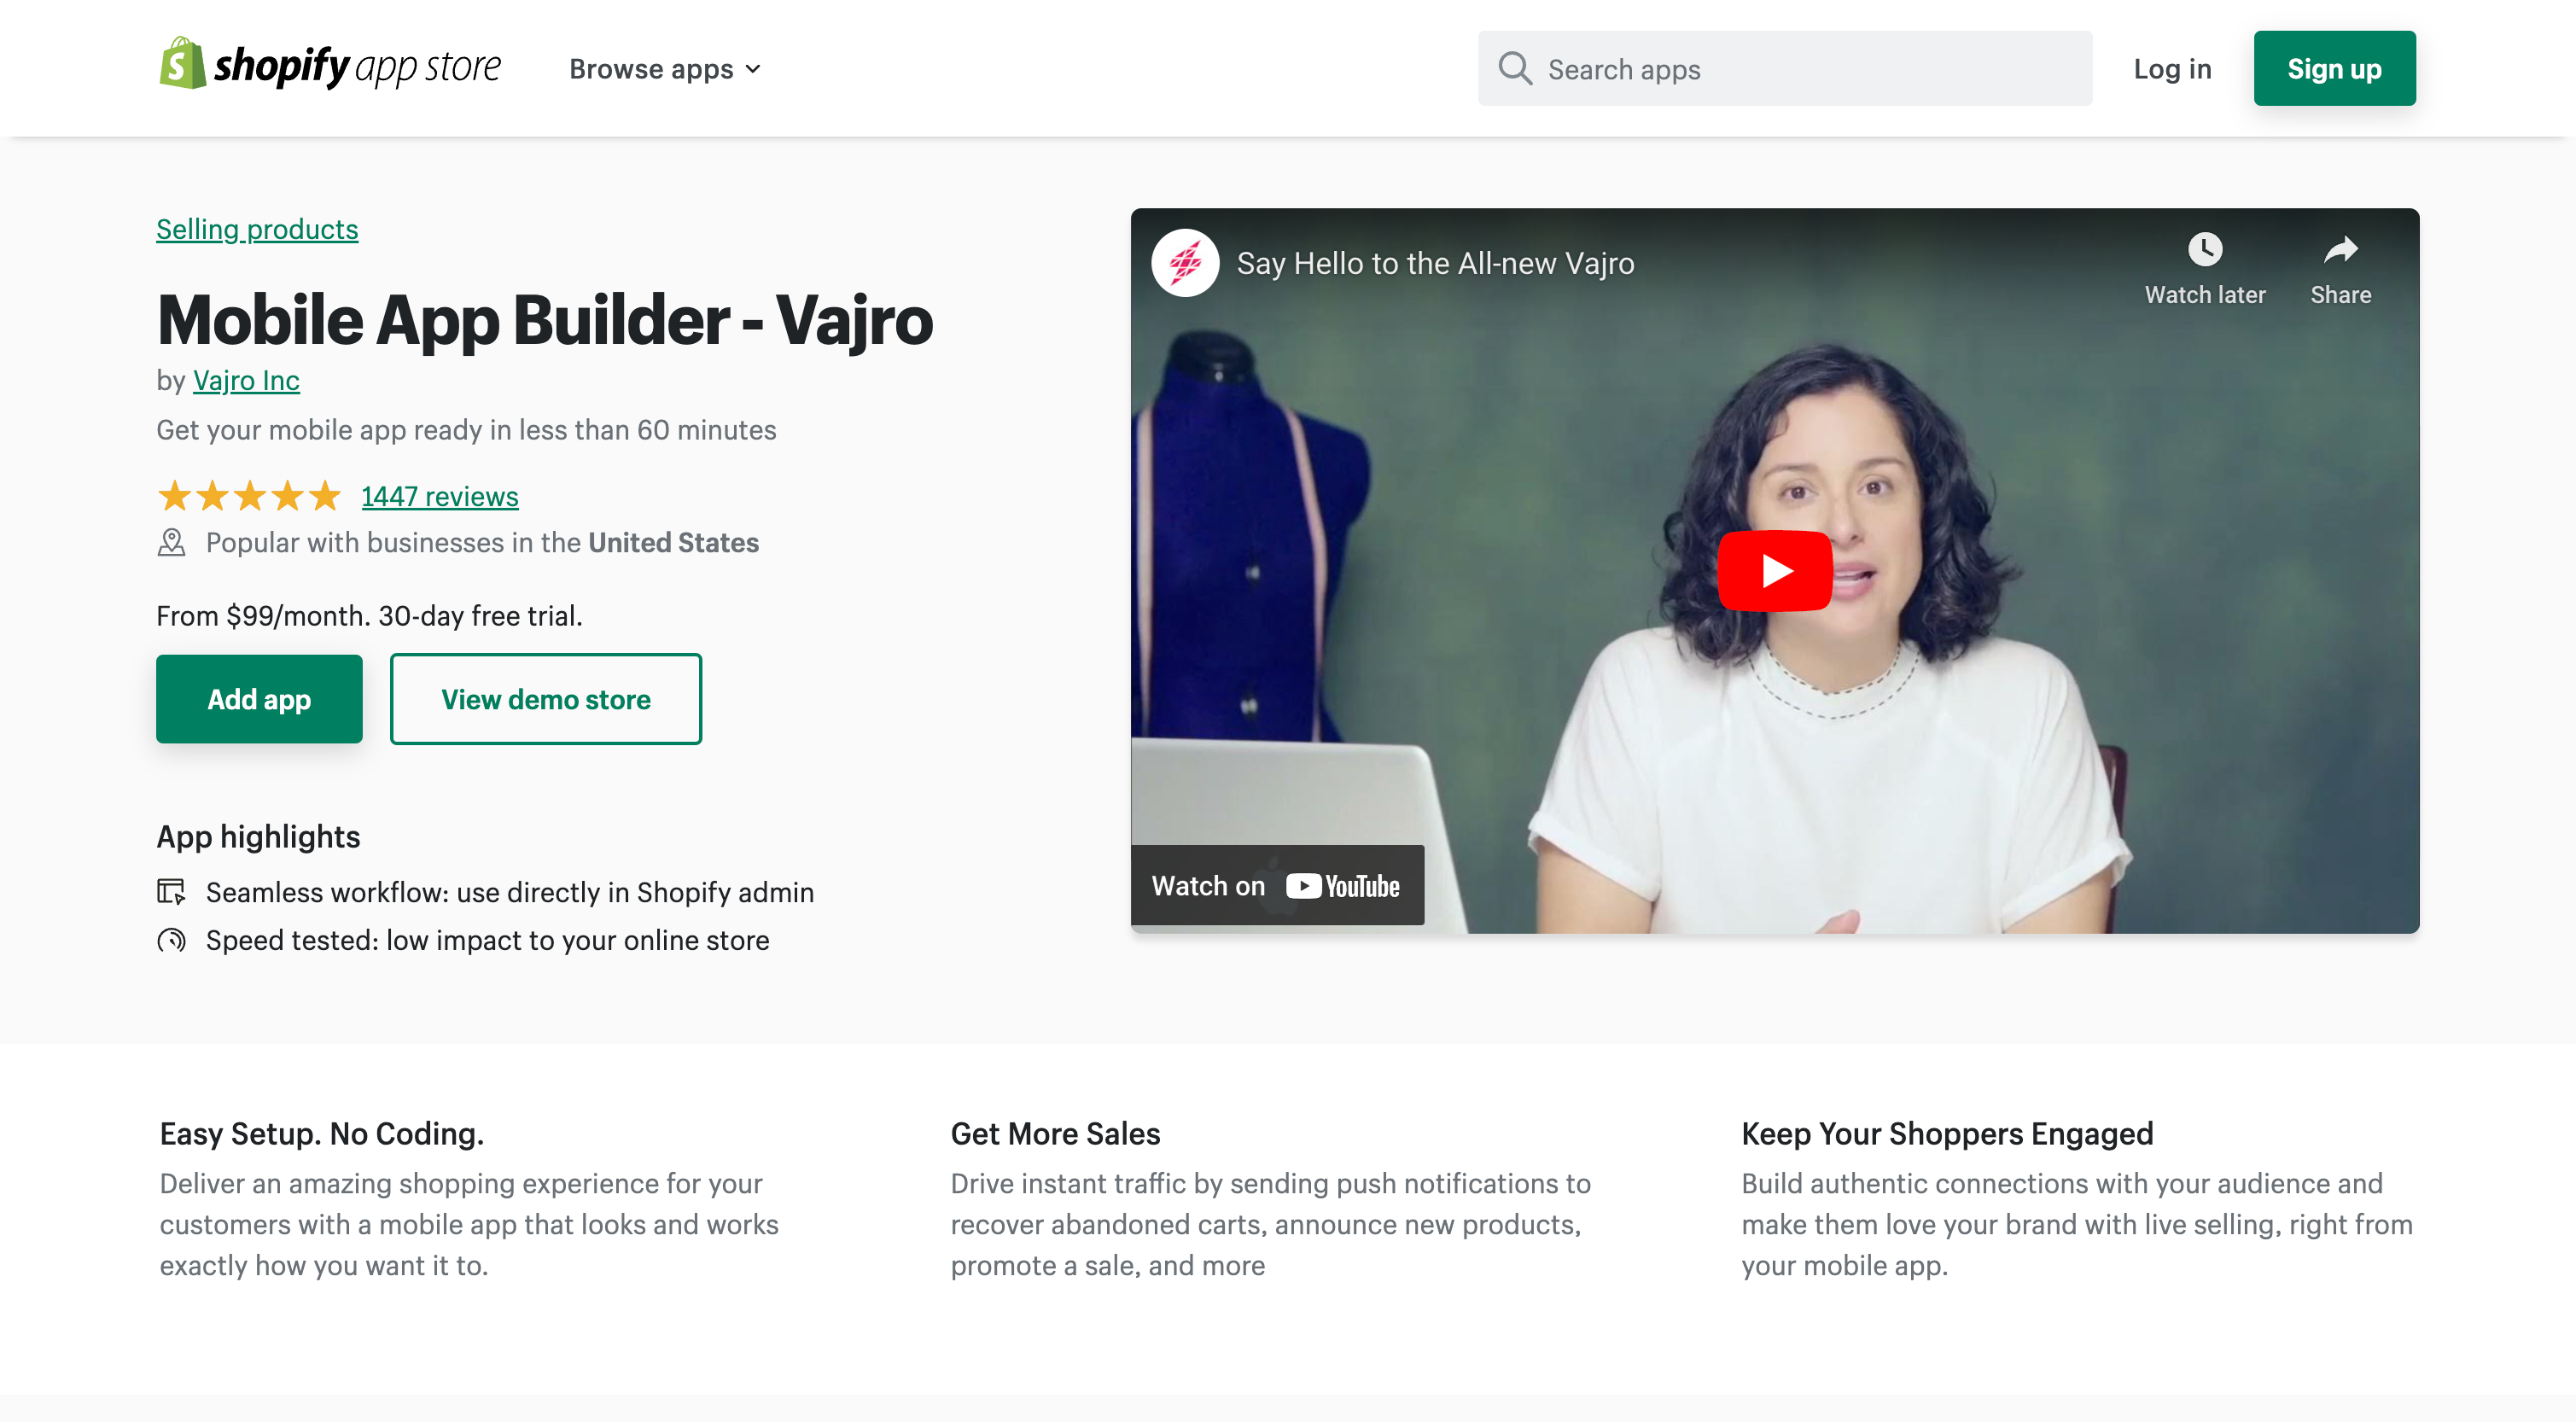 Mobile App Builder ‑ Vajro - Get your mobile app ready in less than 60 minutes | Shopify App Store